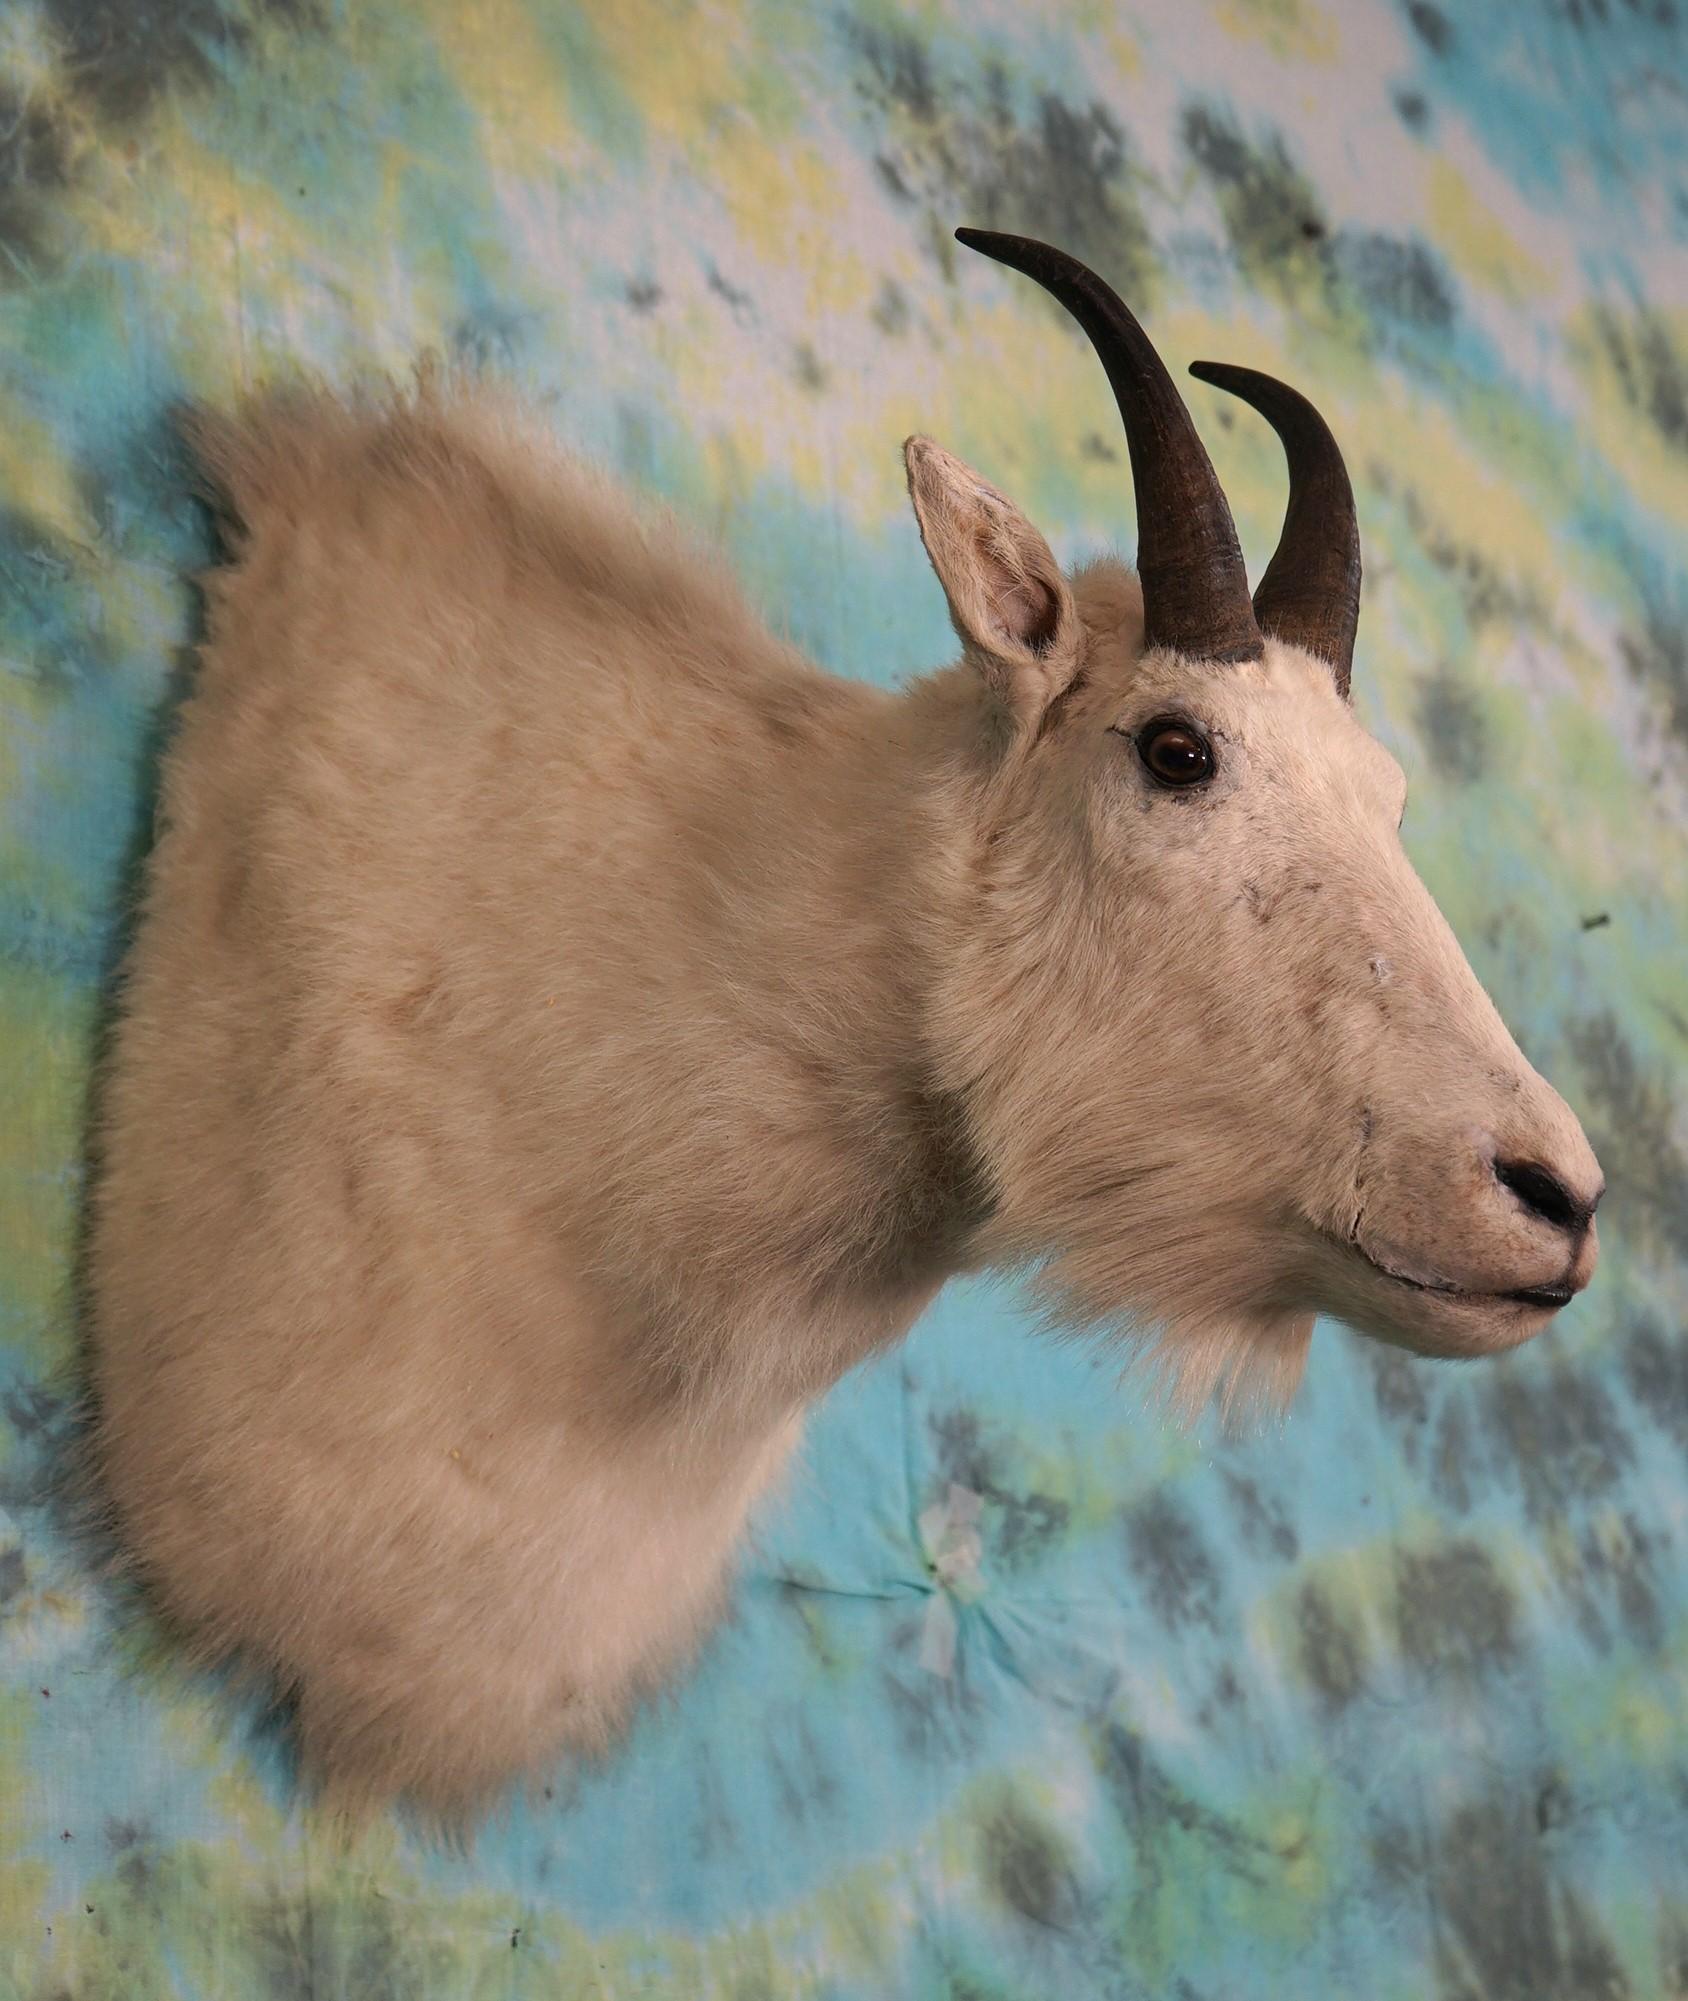 Rocky Mountain Goat Shoulder Mount Taxidermy